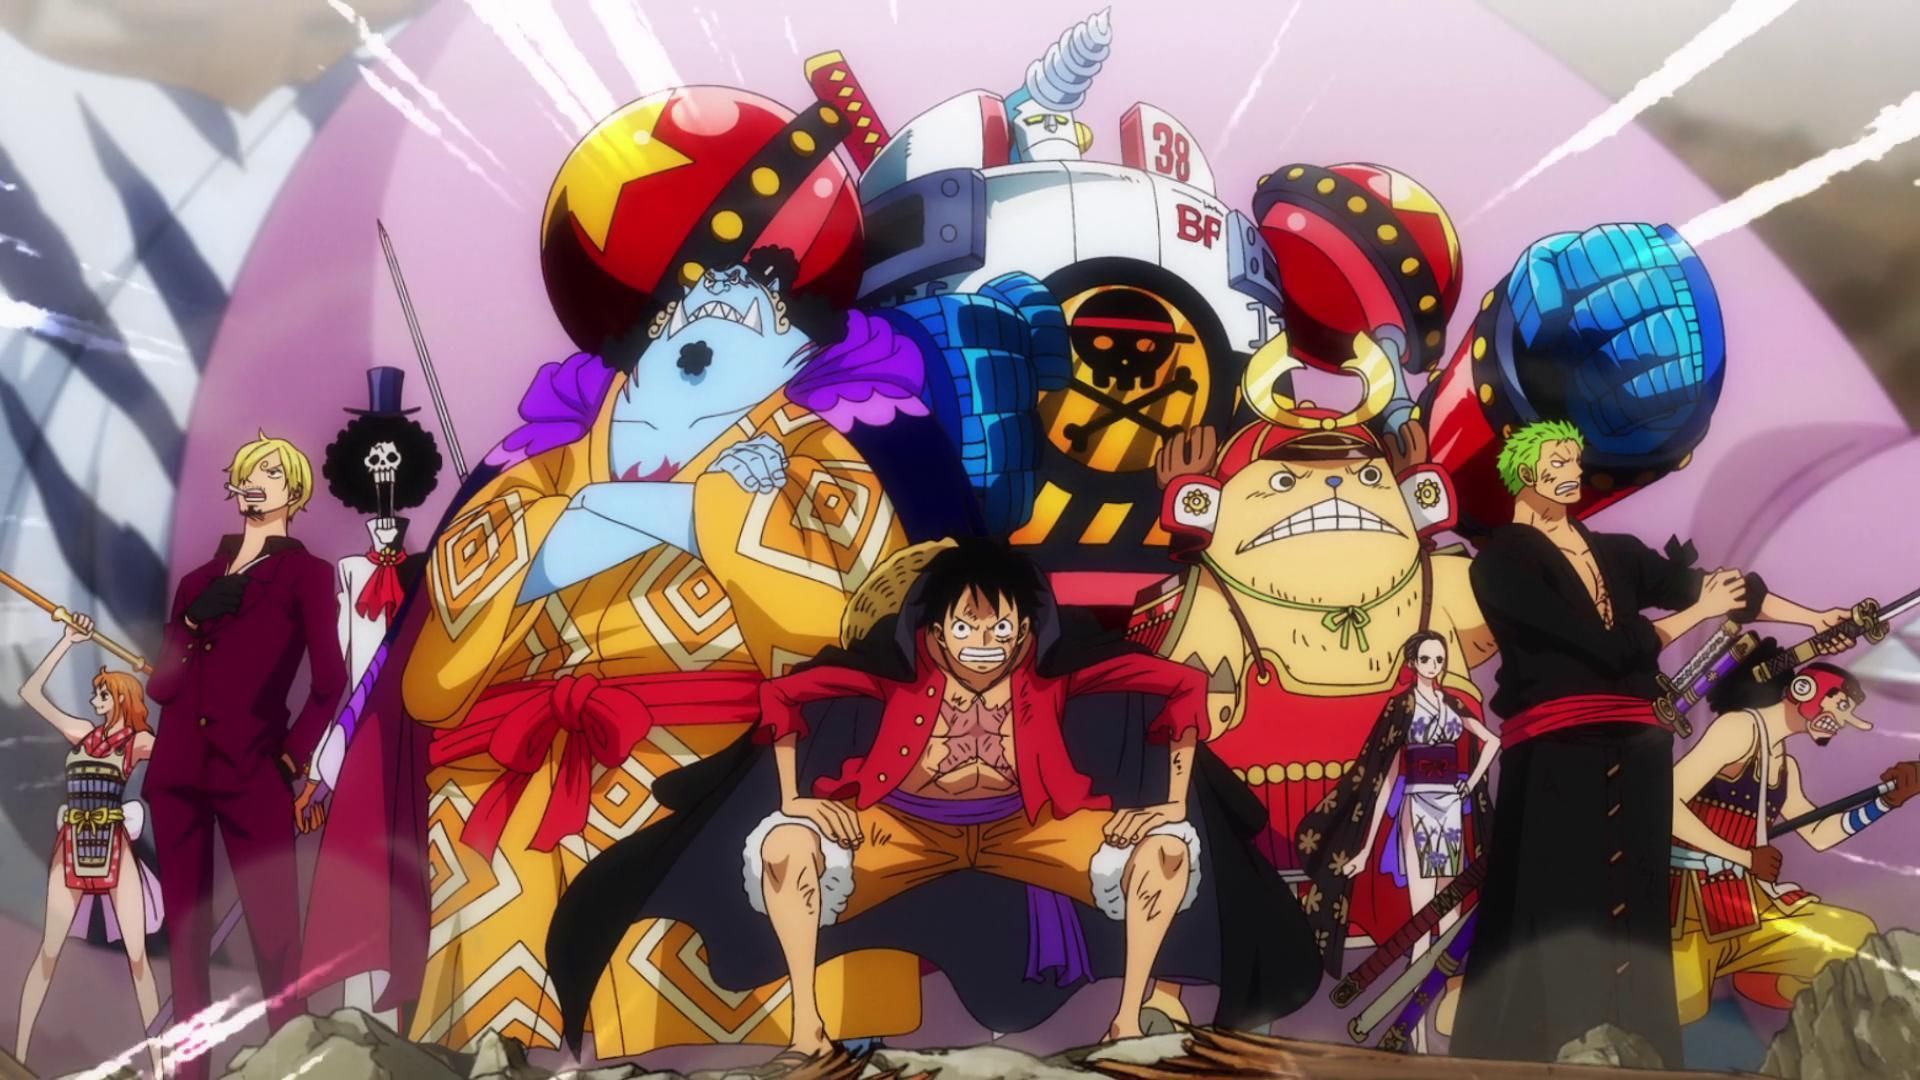 The Straw Hat Pirates in Wano (Image via Toei Animation)